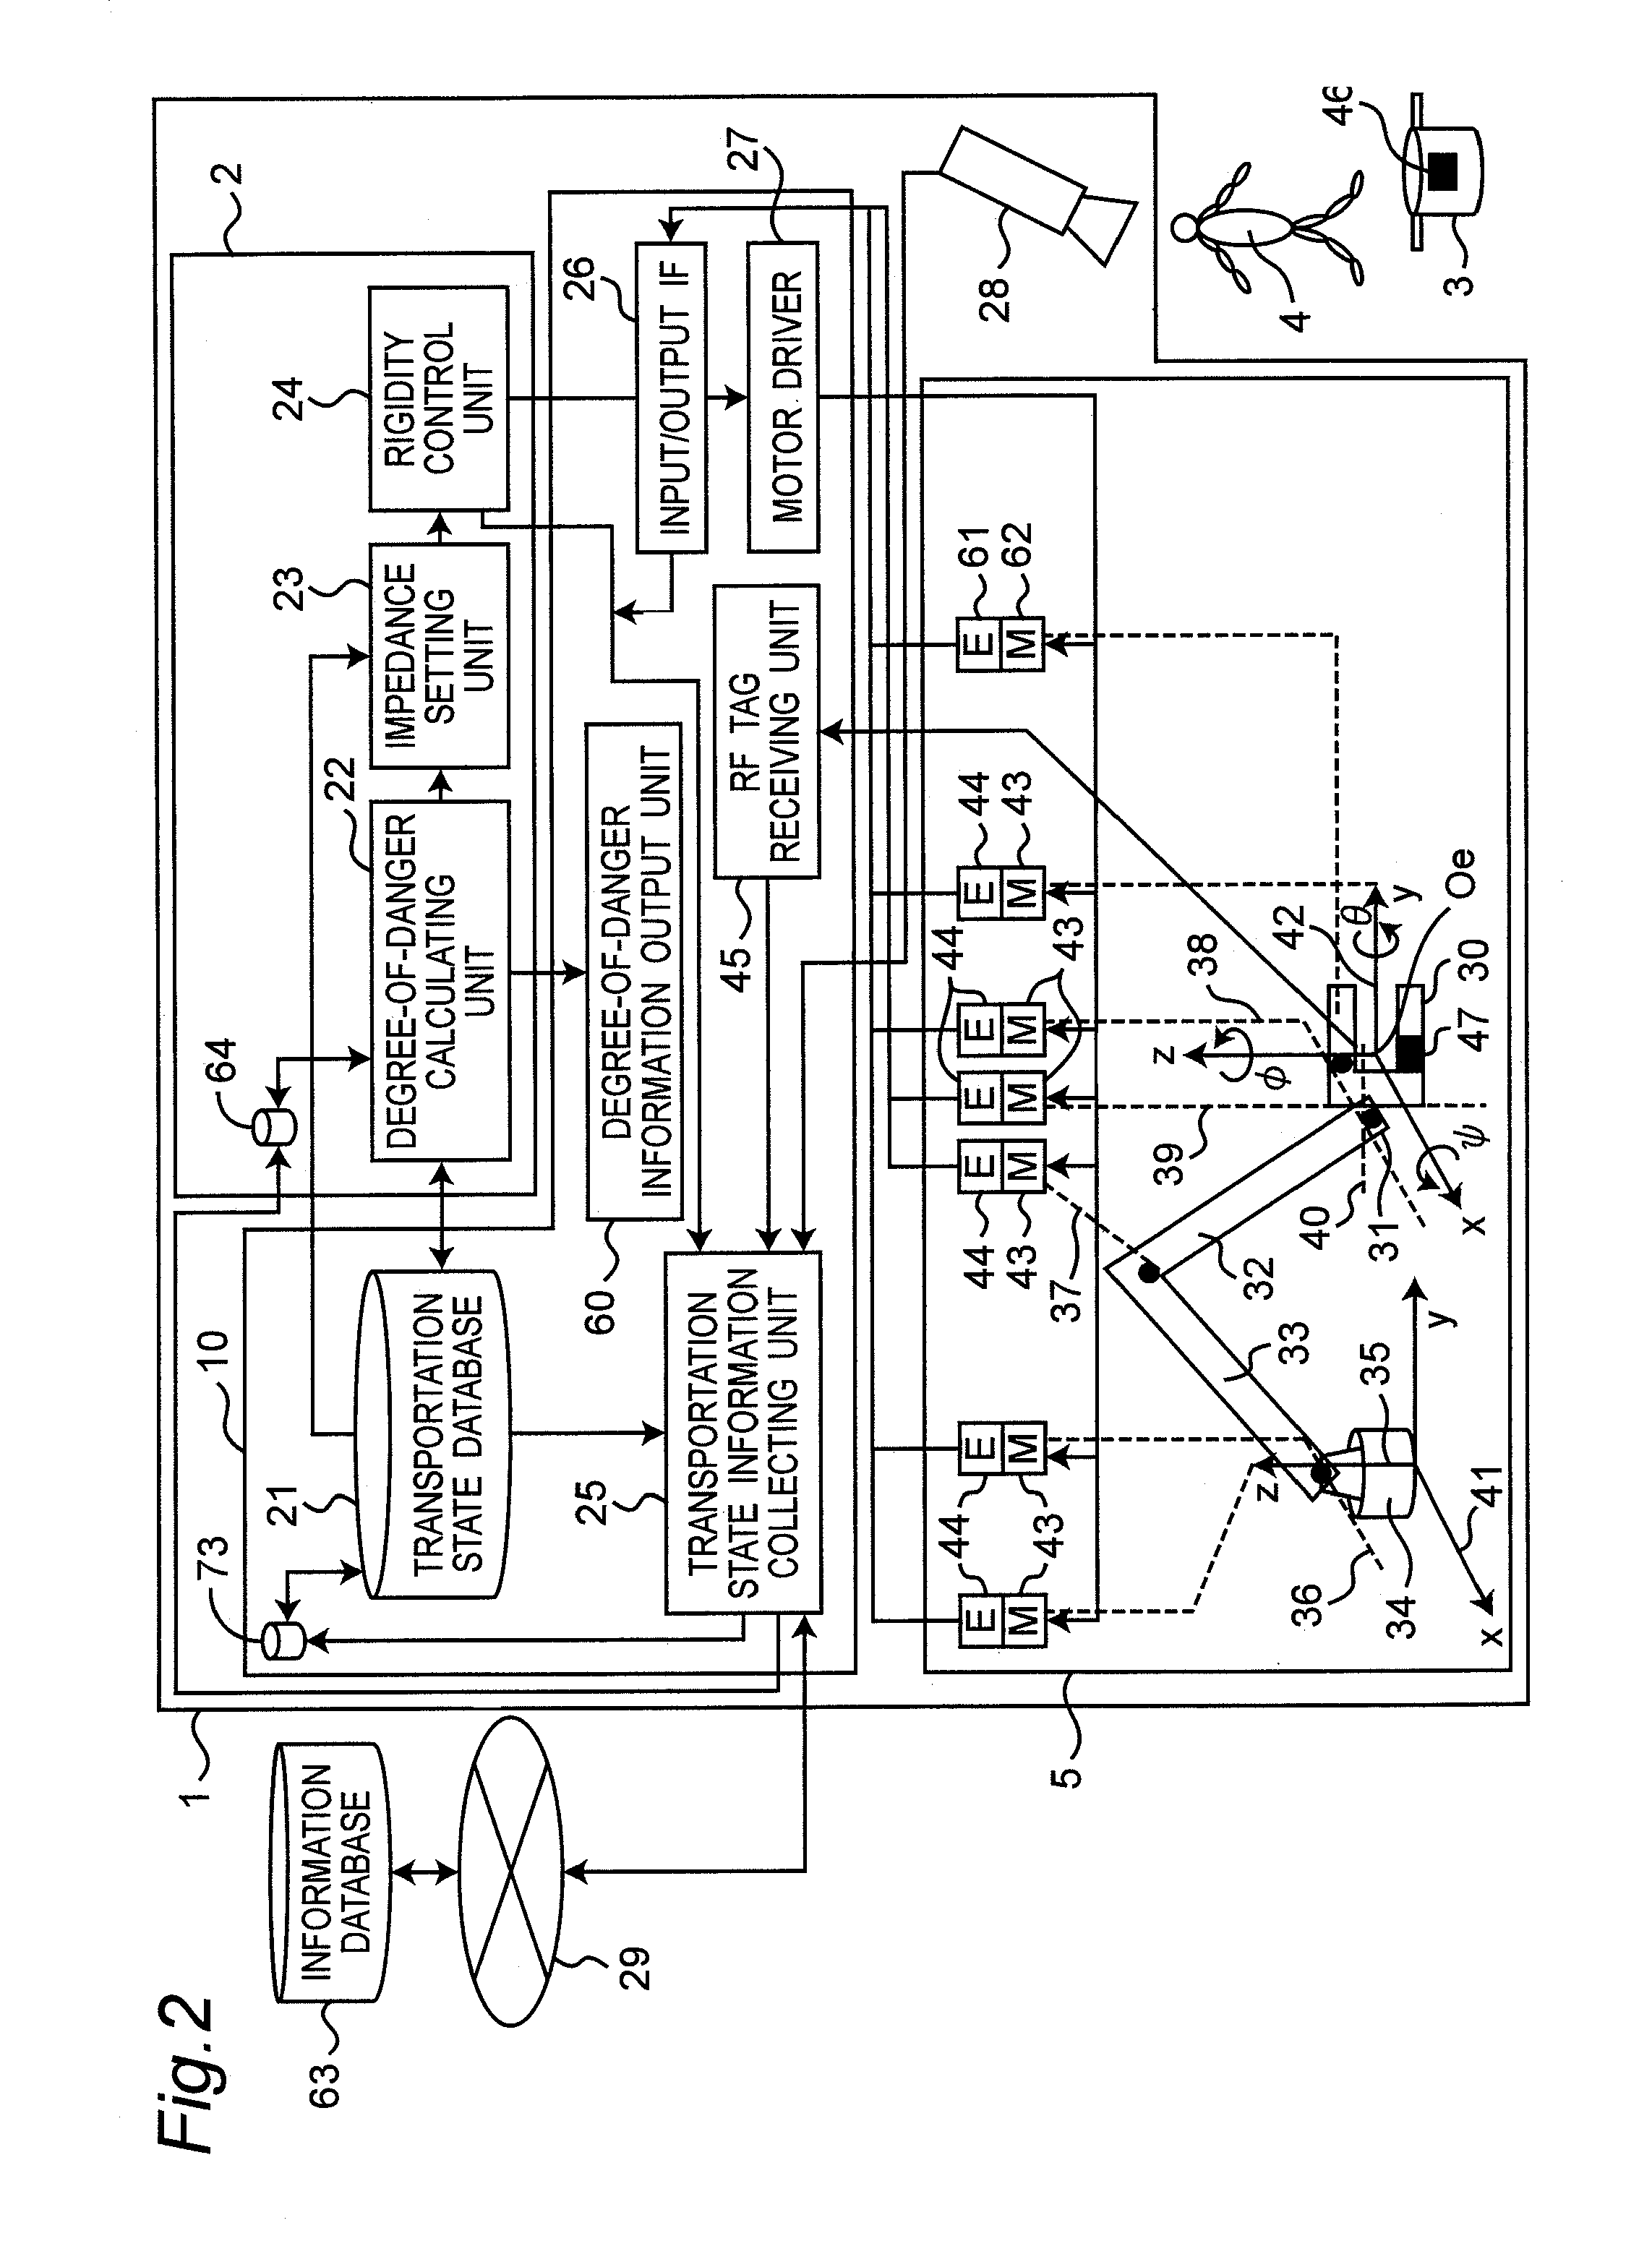 Apparatus and method for controlling robot arm, and robot and program